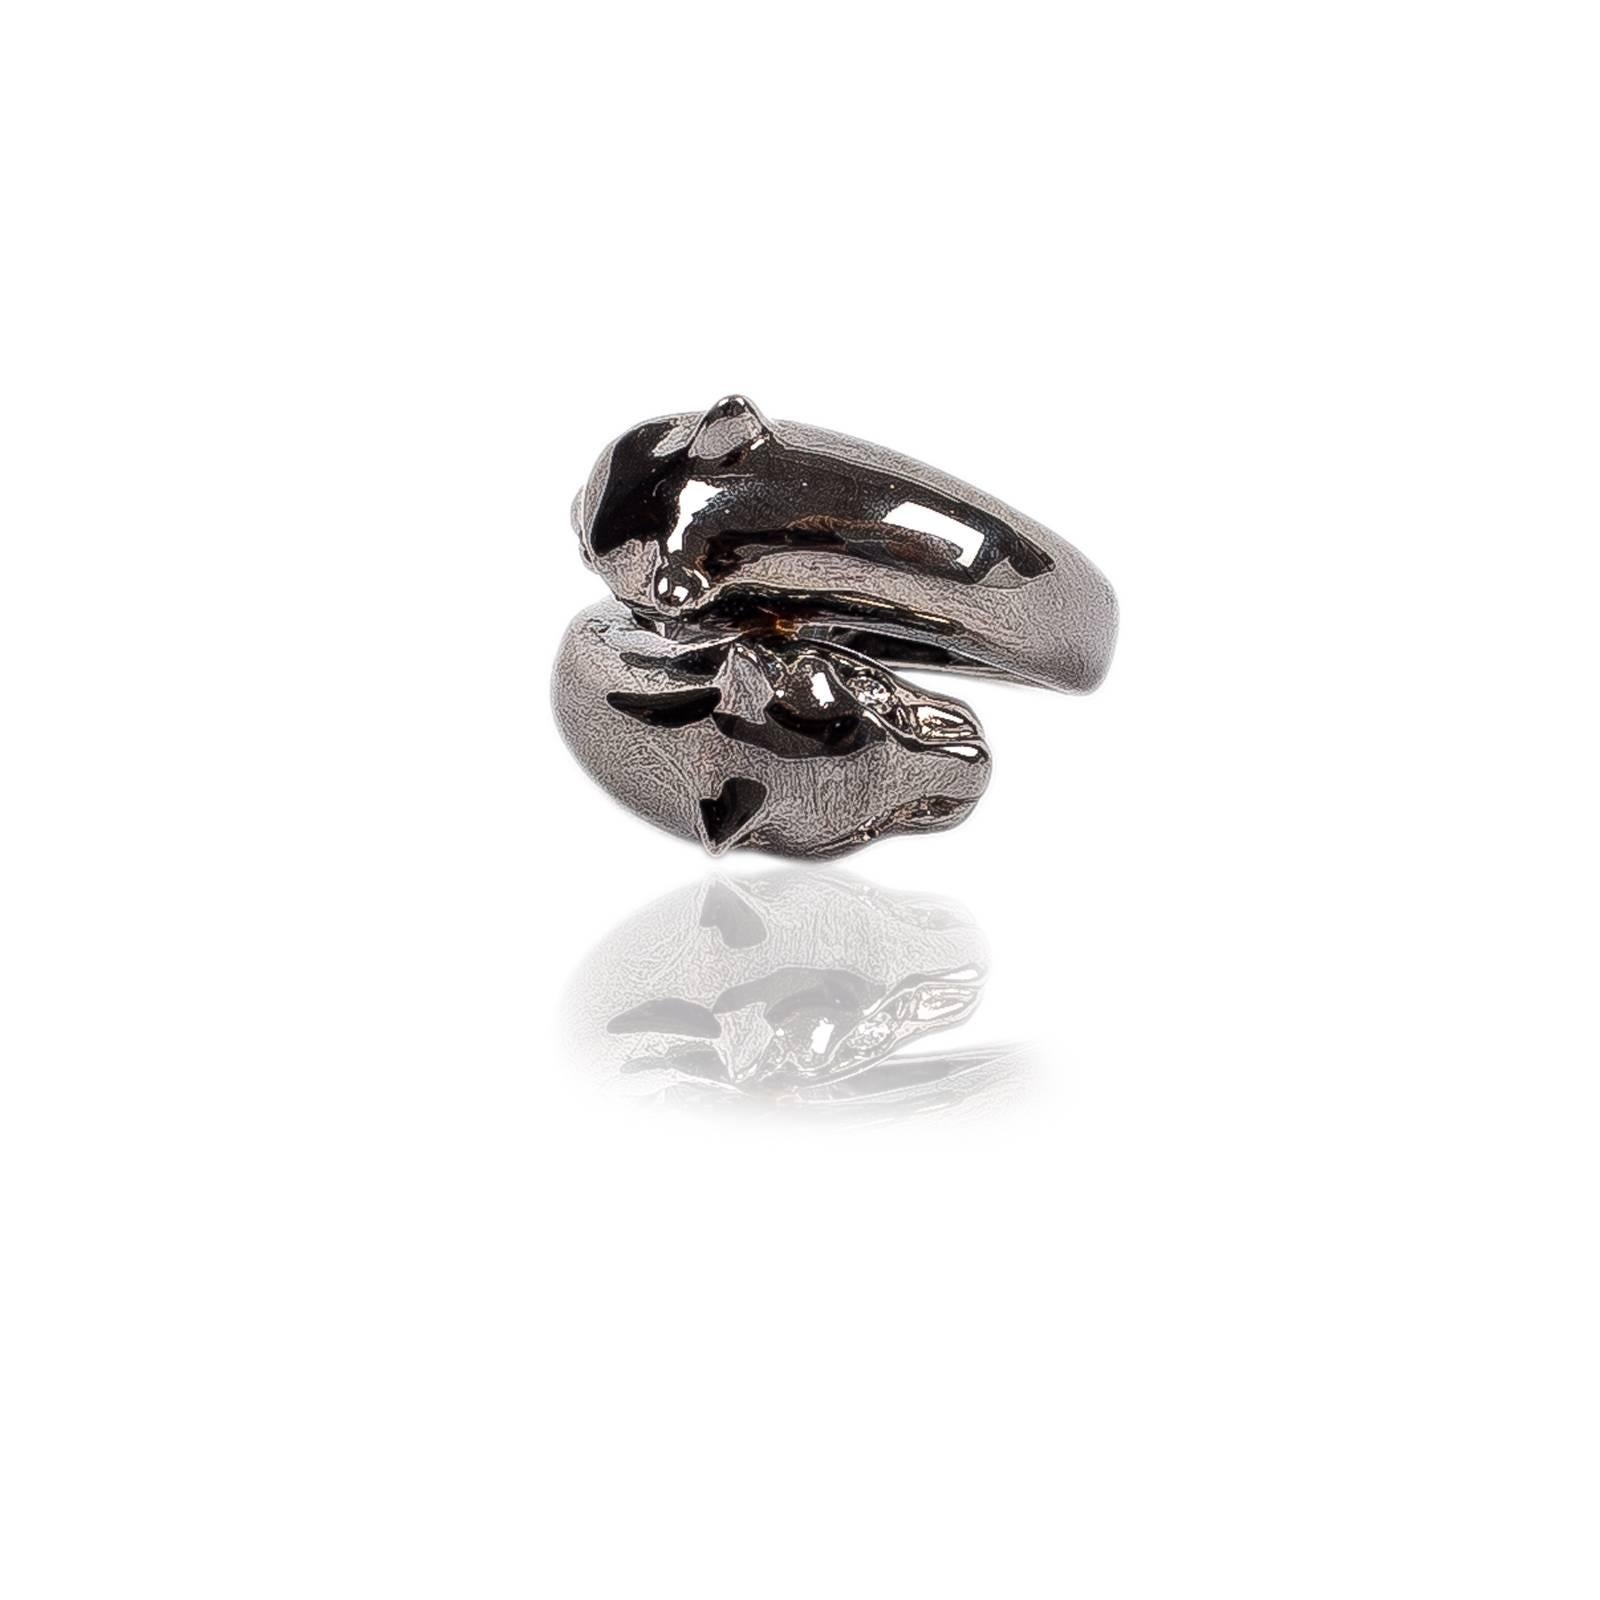 18kt black coated white gold ring with white diamonds ct. 0,06.

Handmade in Italy

Made-to-order production time: 4 weeks
